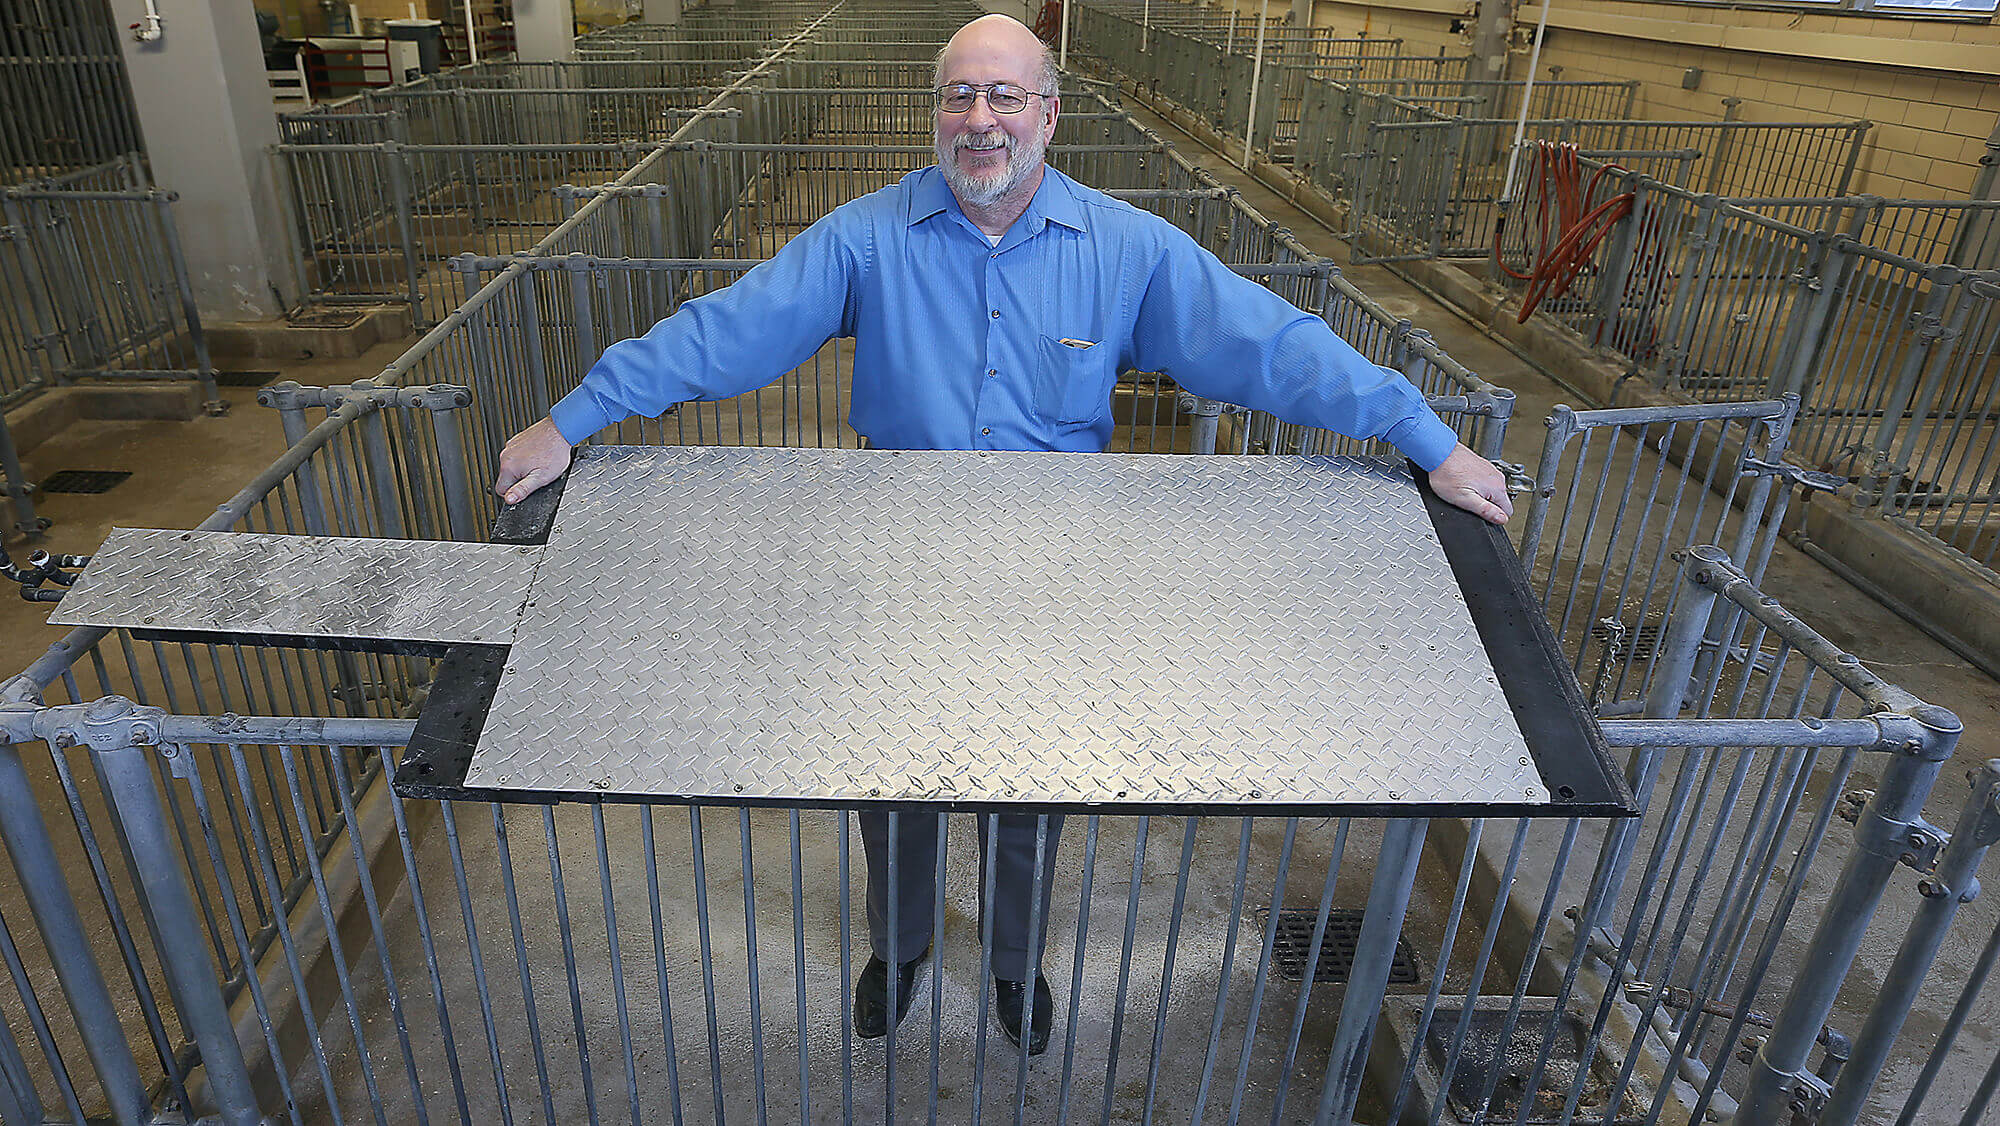 Robert Stwalley, assistant professor in the Department of Agricultural & Biological Engineering at Purdue University, shows a cooling pad designed to keep sows more comfortable during farrowing. The pads, developed by Stwalley and Allan Schinckel, professor in the Department of Animal Sciences, consist of 2-foot-by-4-foot aluminum tread plate on top of copper pipes that circulate water. (Purdue Agricultural Communication photo/Tom Campbell)